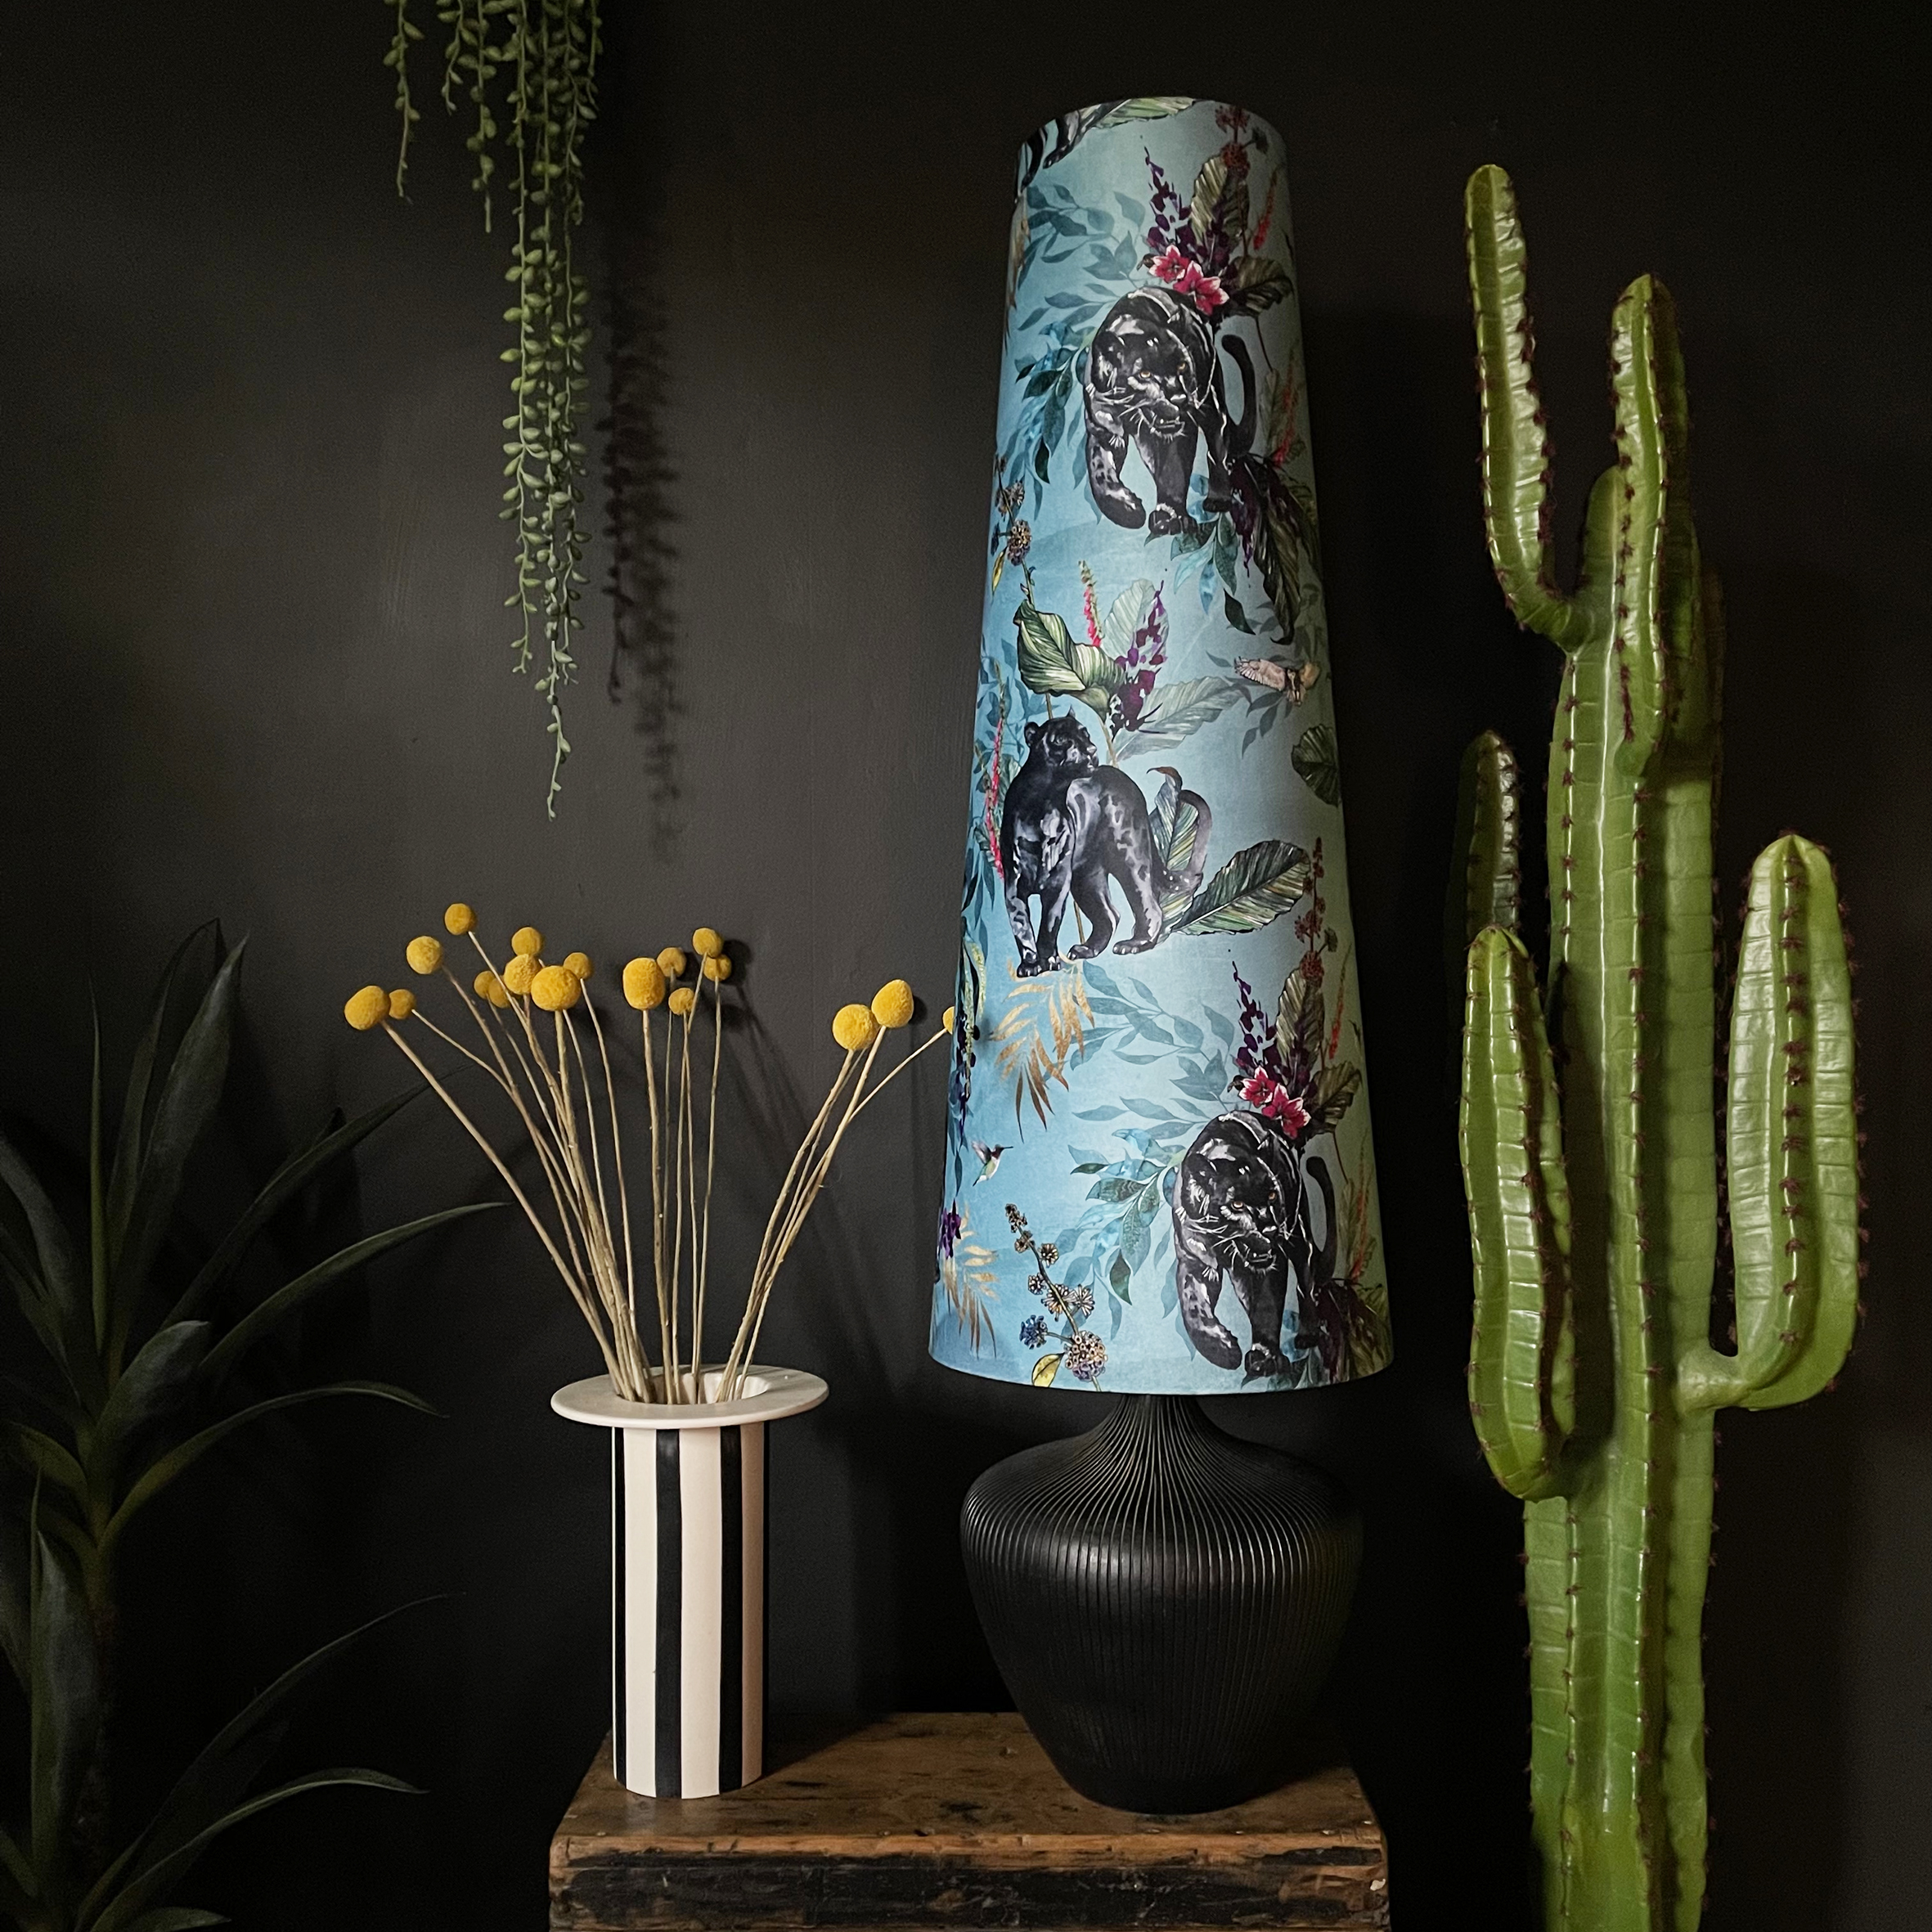 Deadly Night Shade Cone Lampshades in Lithium Blue